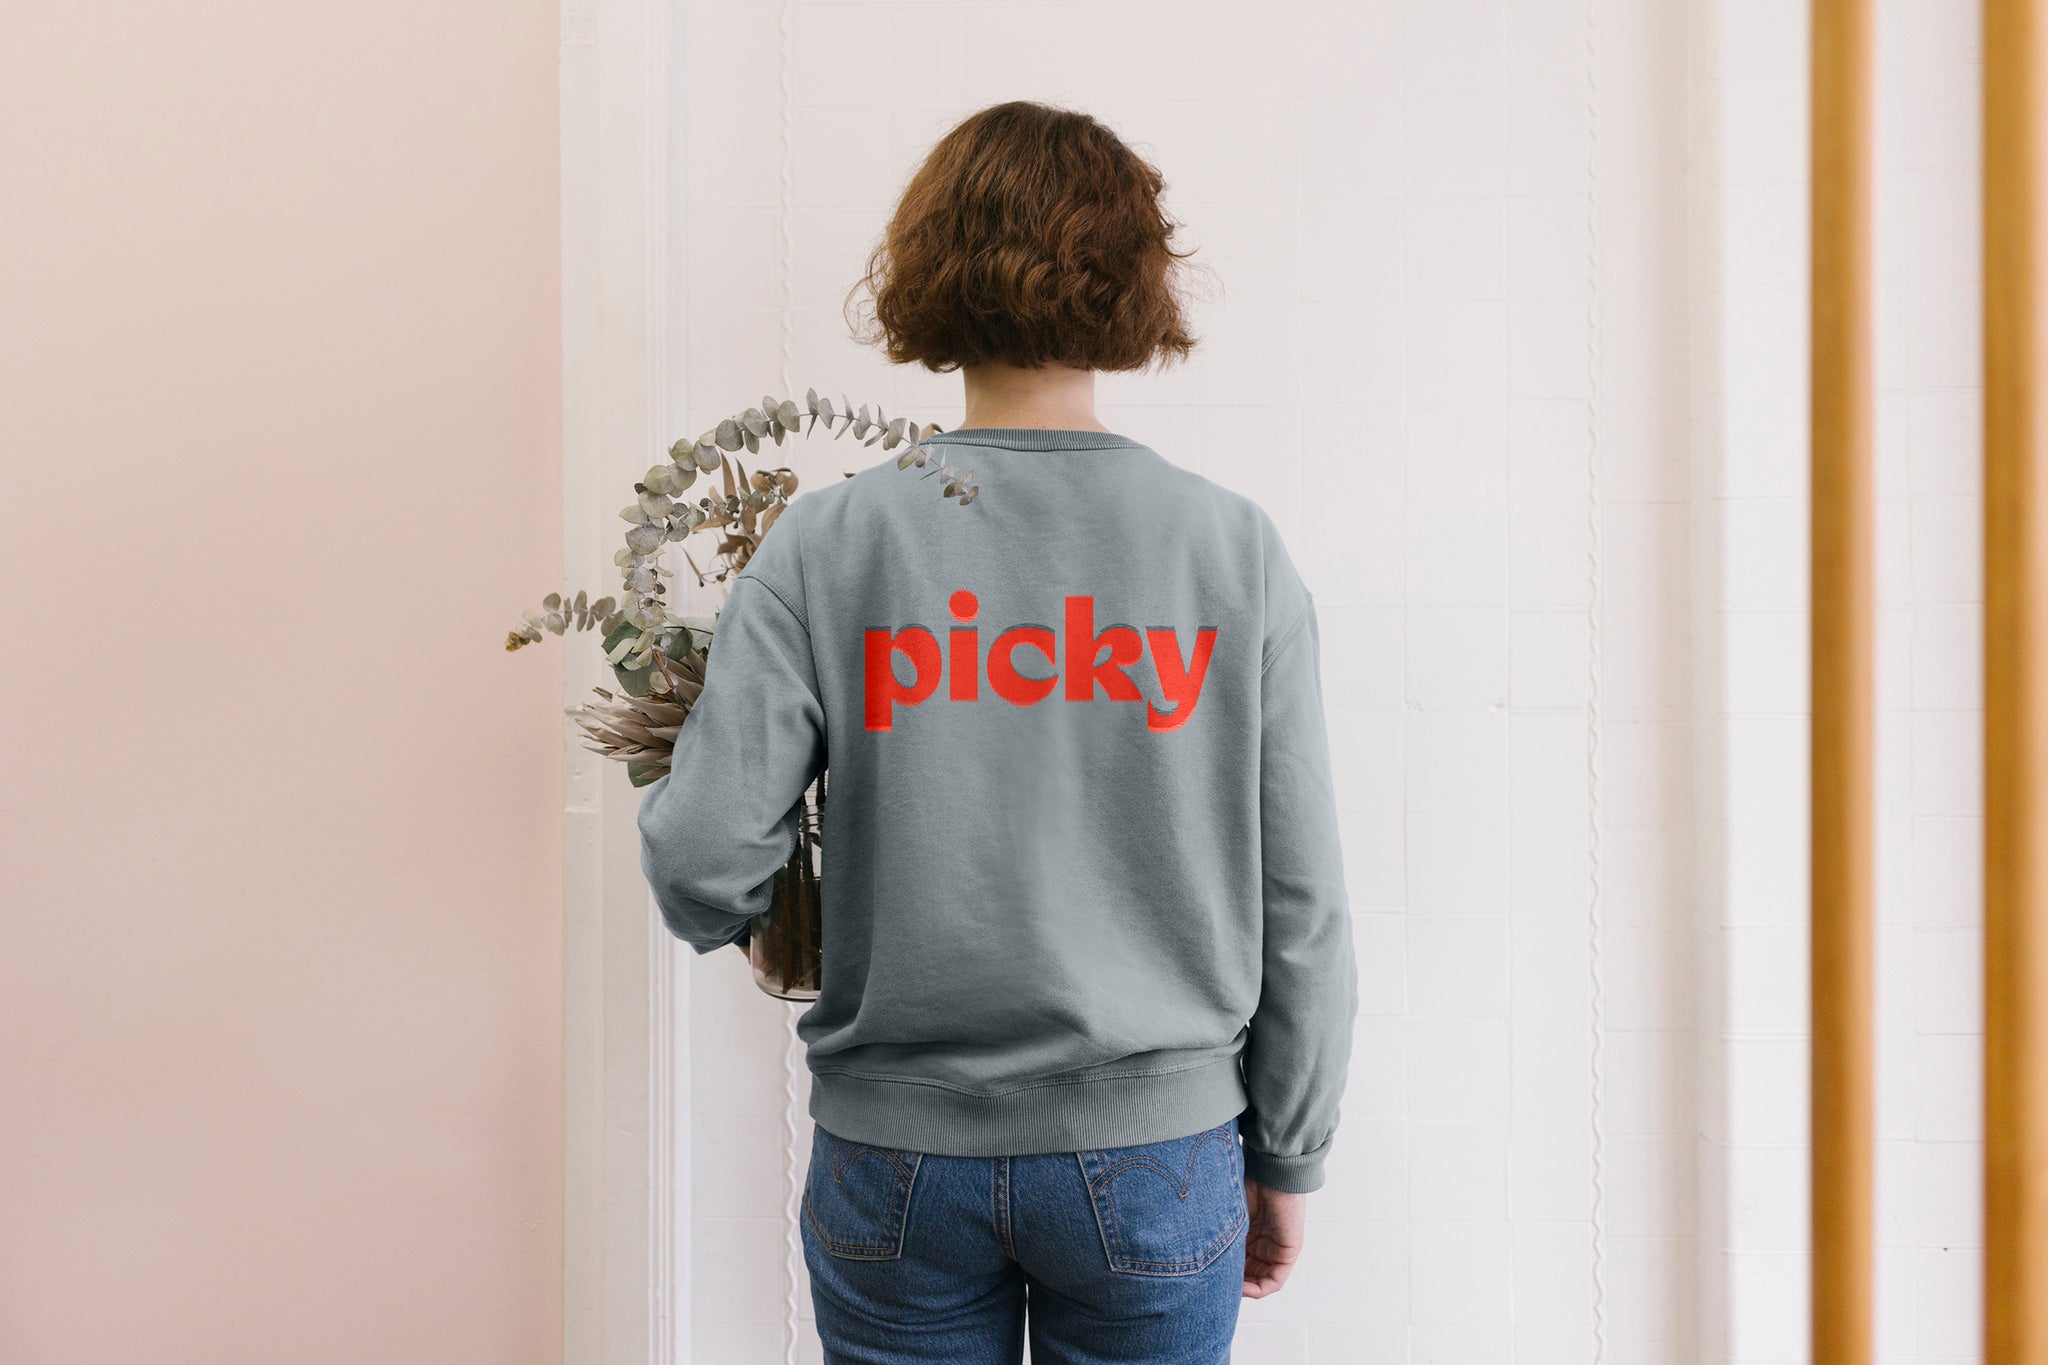 A lady is standing in front of a wall holding a eucalyptus plant. She is wearing a grey sweatshirt with the word Picky written on the back, written in red and placed in the top middle. Her hair is brown and sits at the height of her ears. The background is a soft pink.